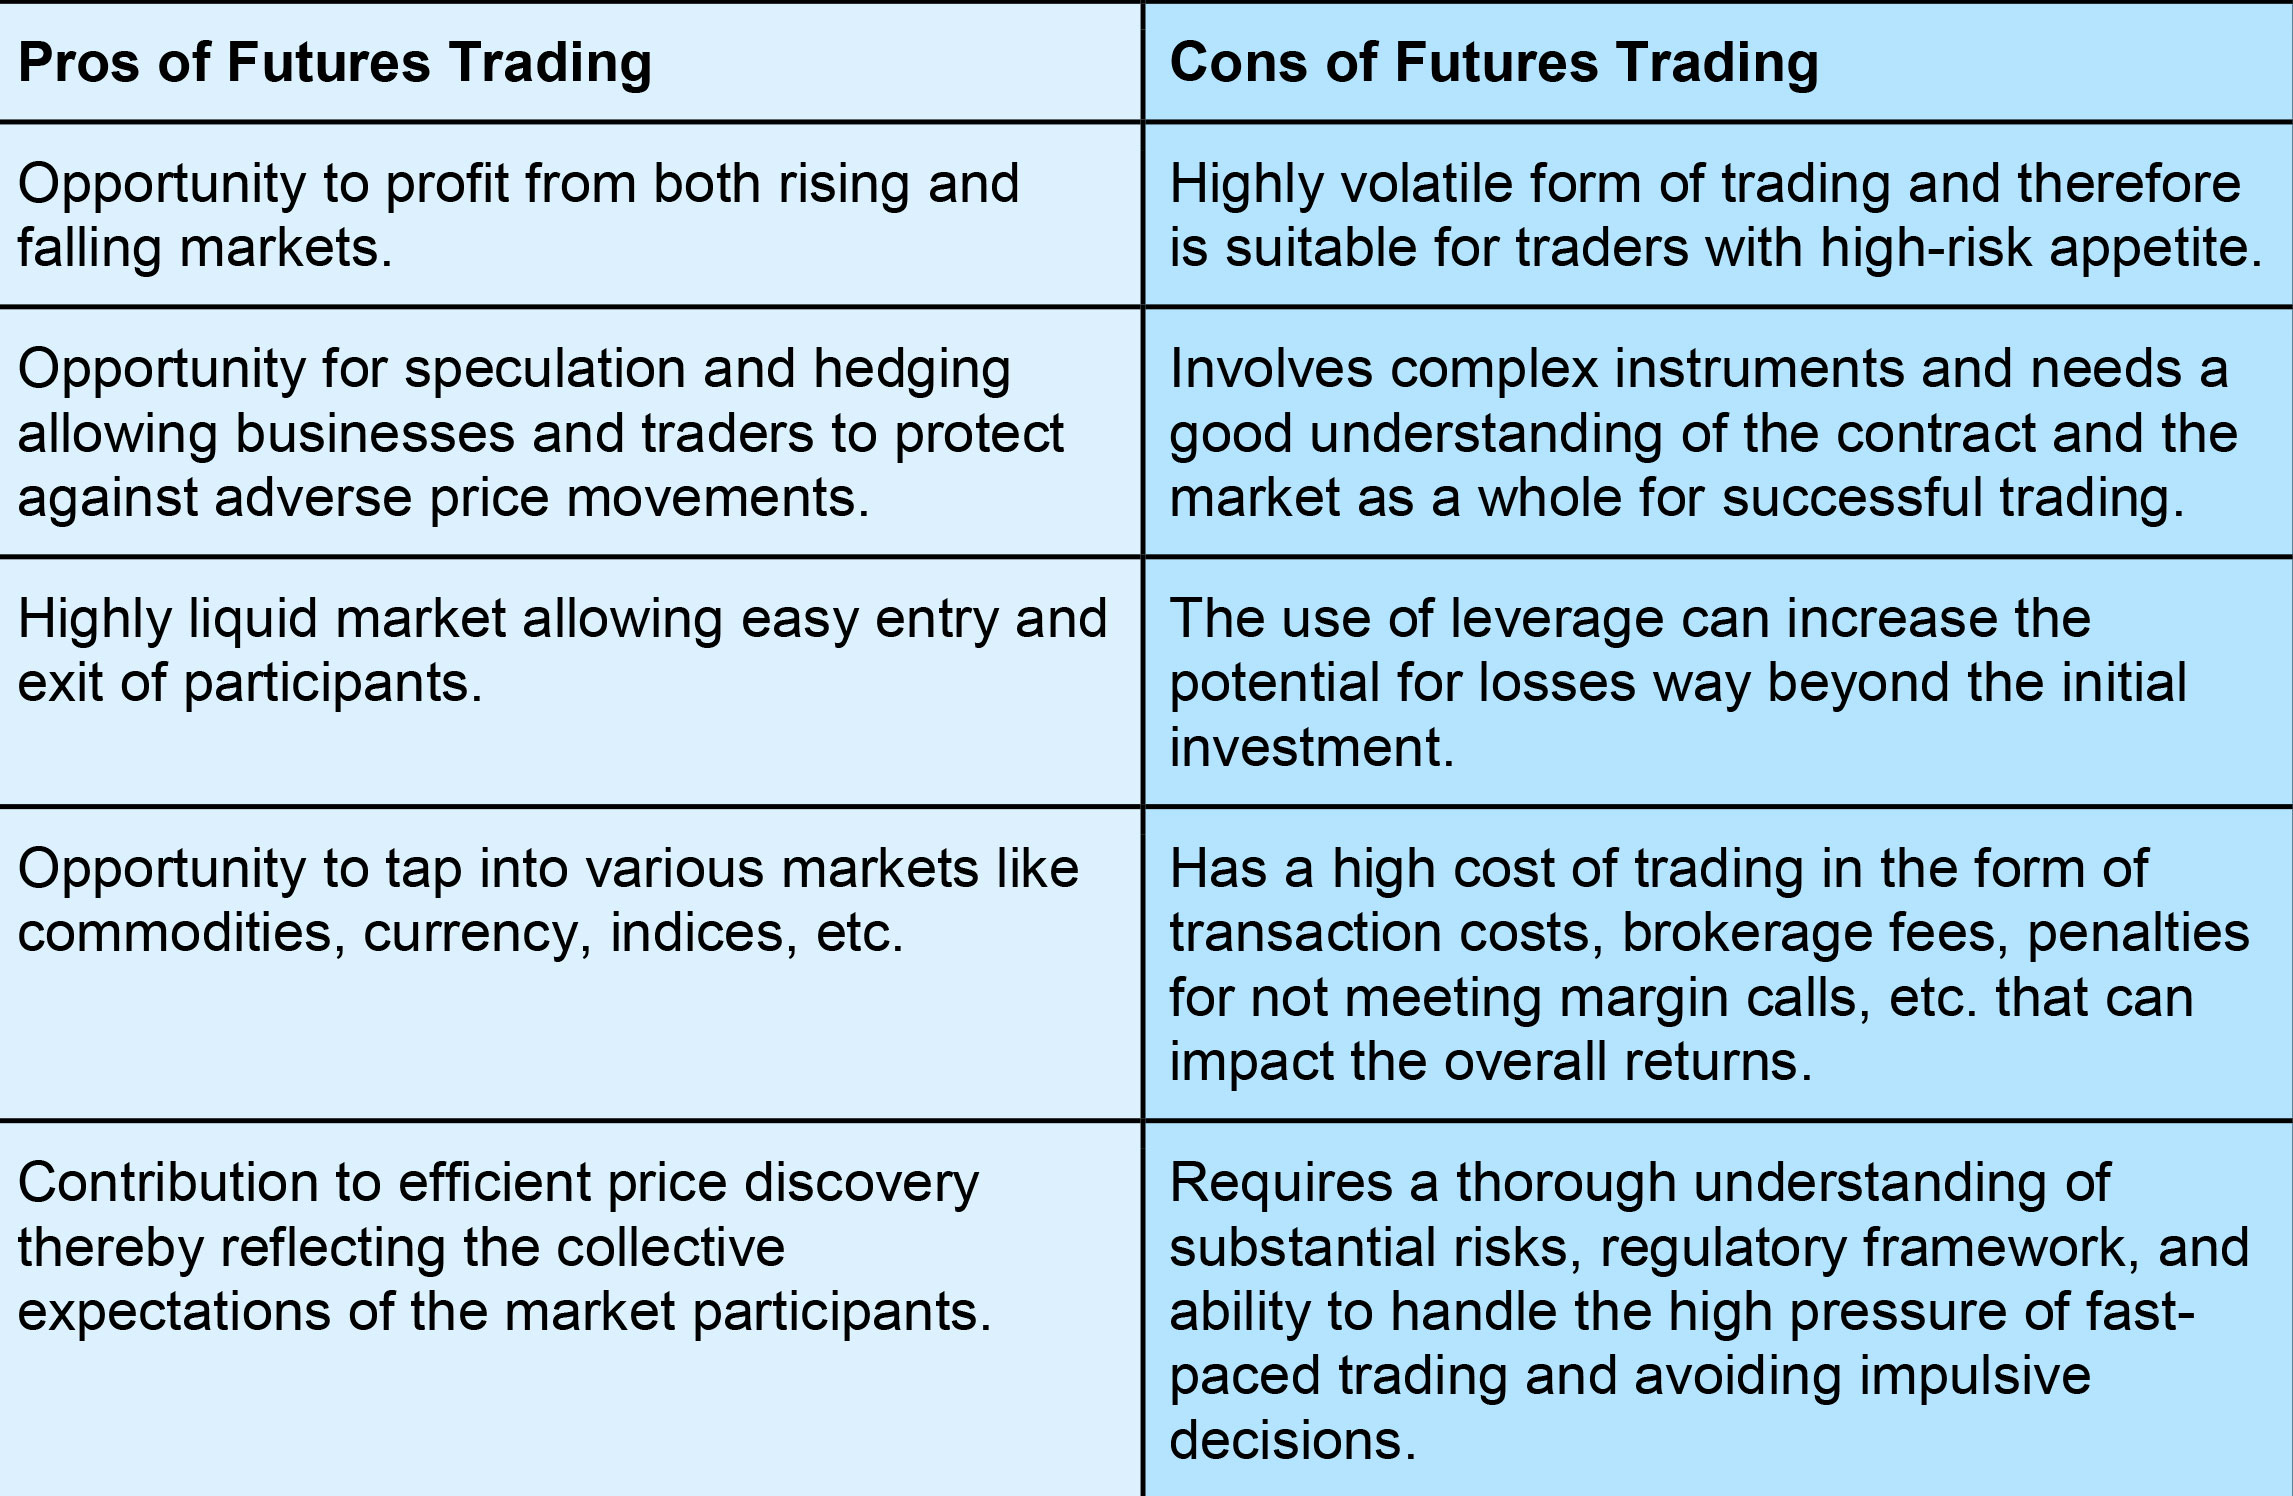 What are the pros and cons of future trading?